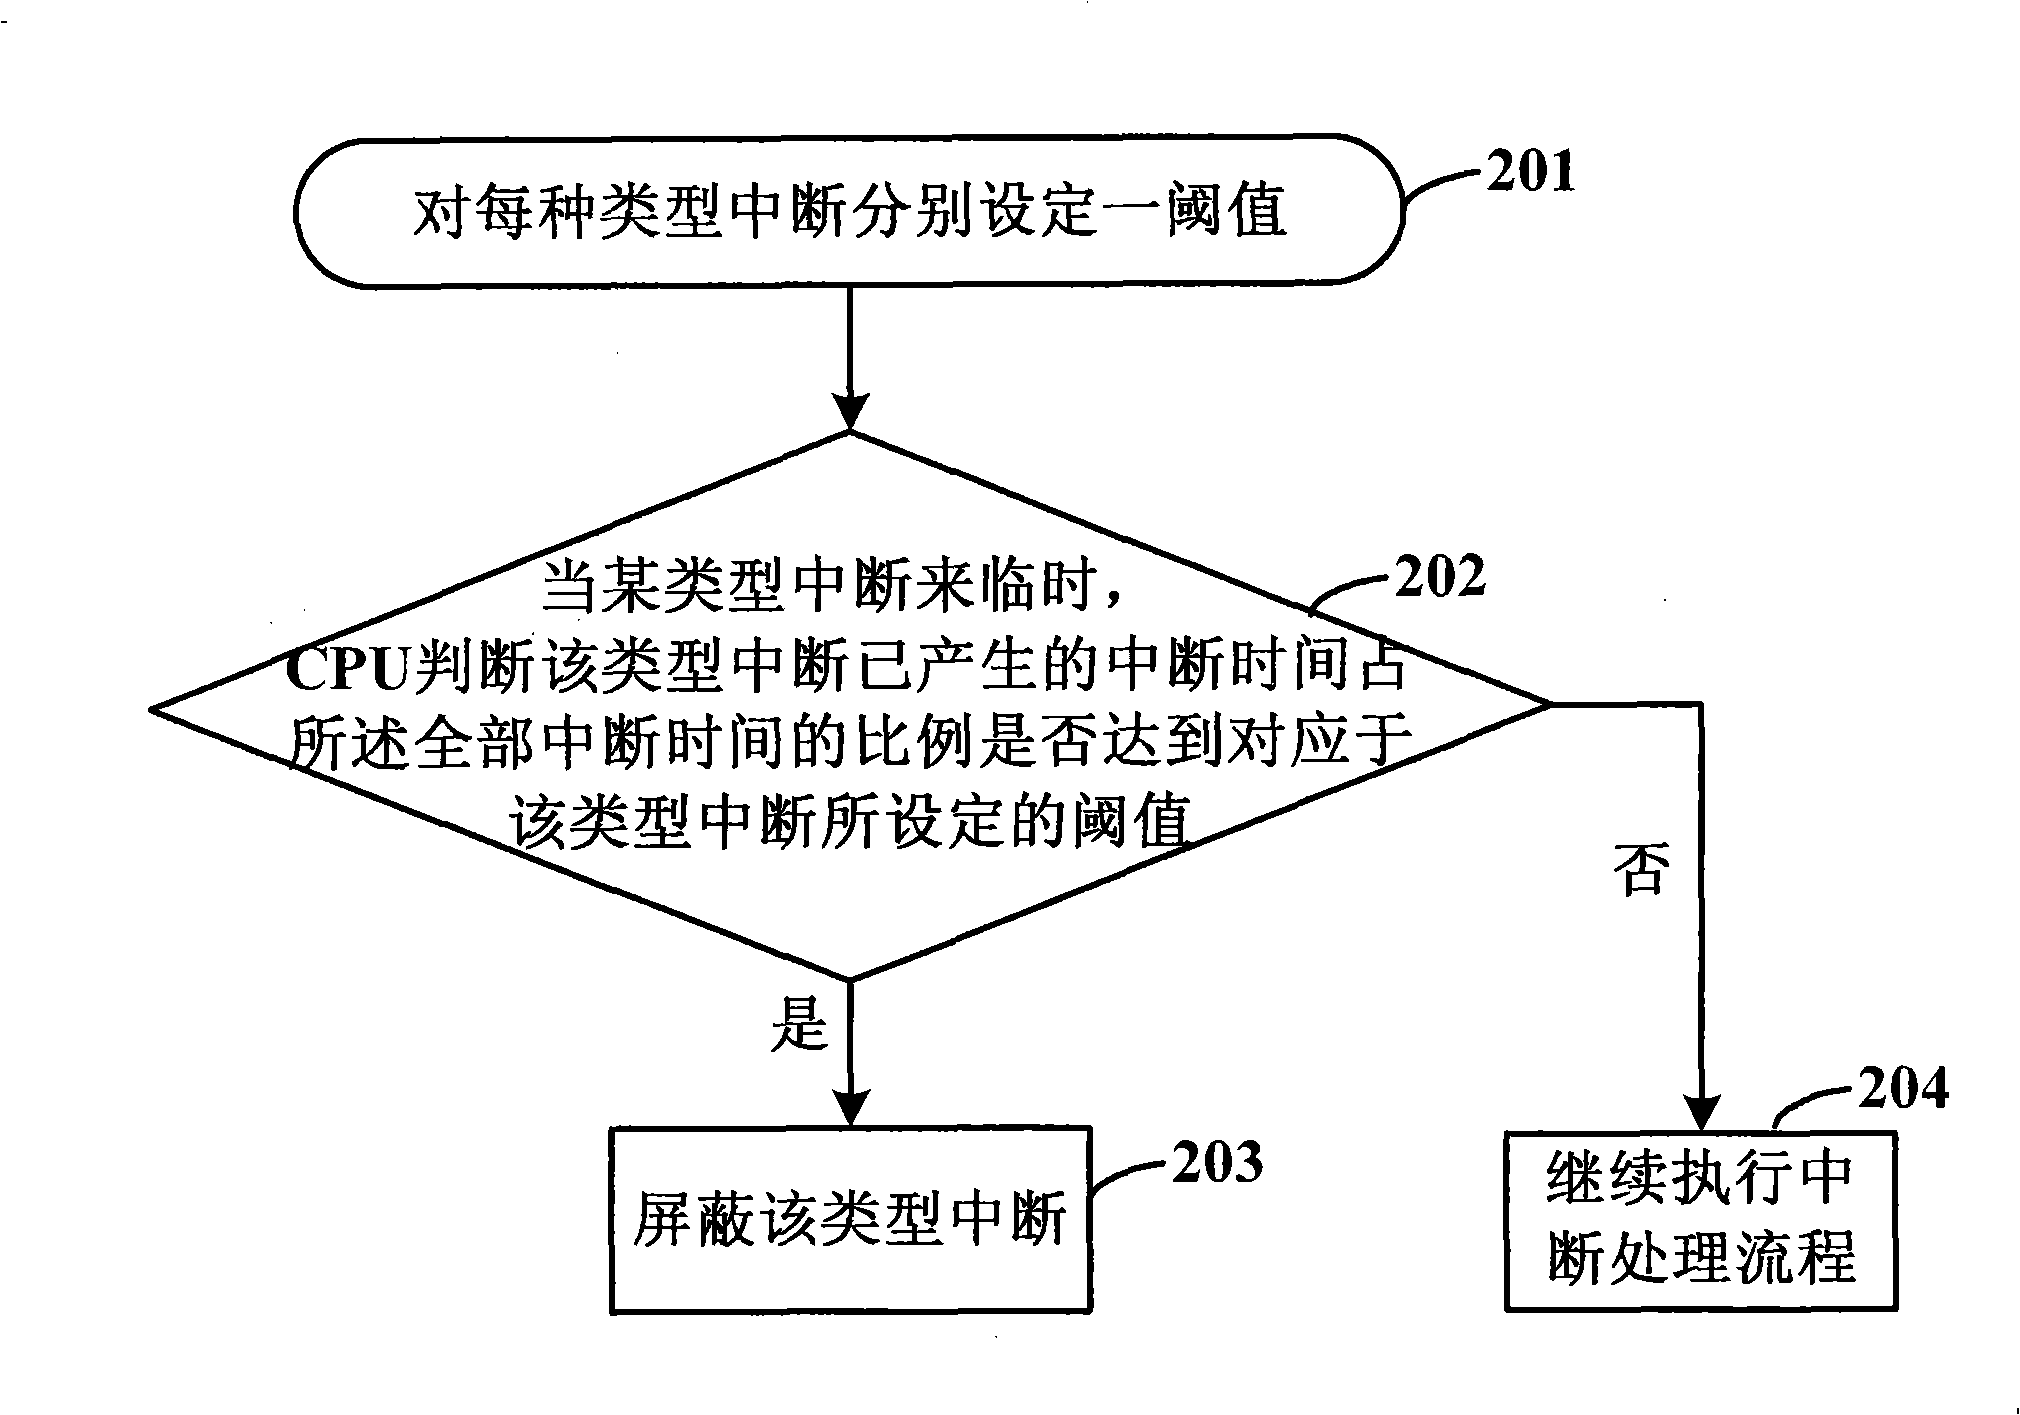 Method for real-time operating system to avoid interrupt occupying excess CPU resources